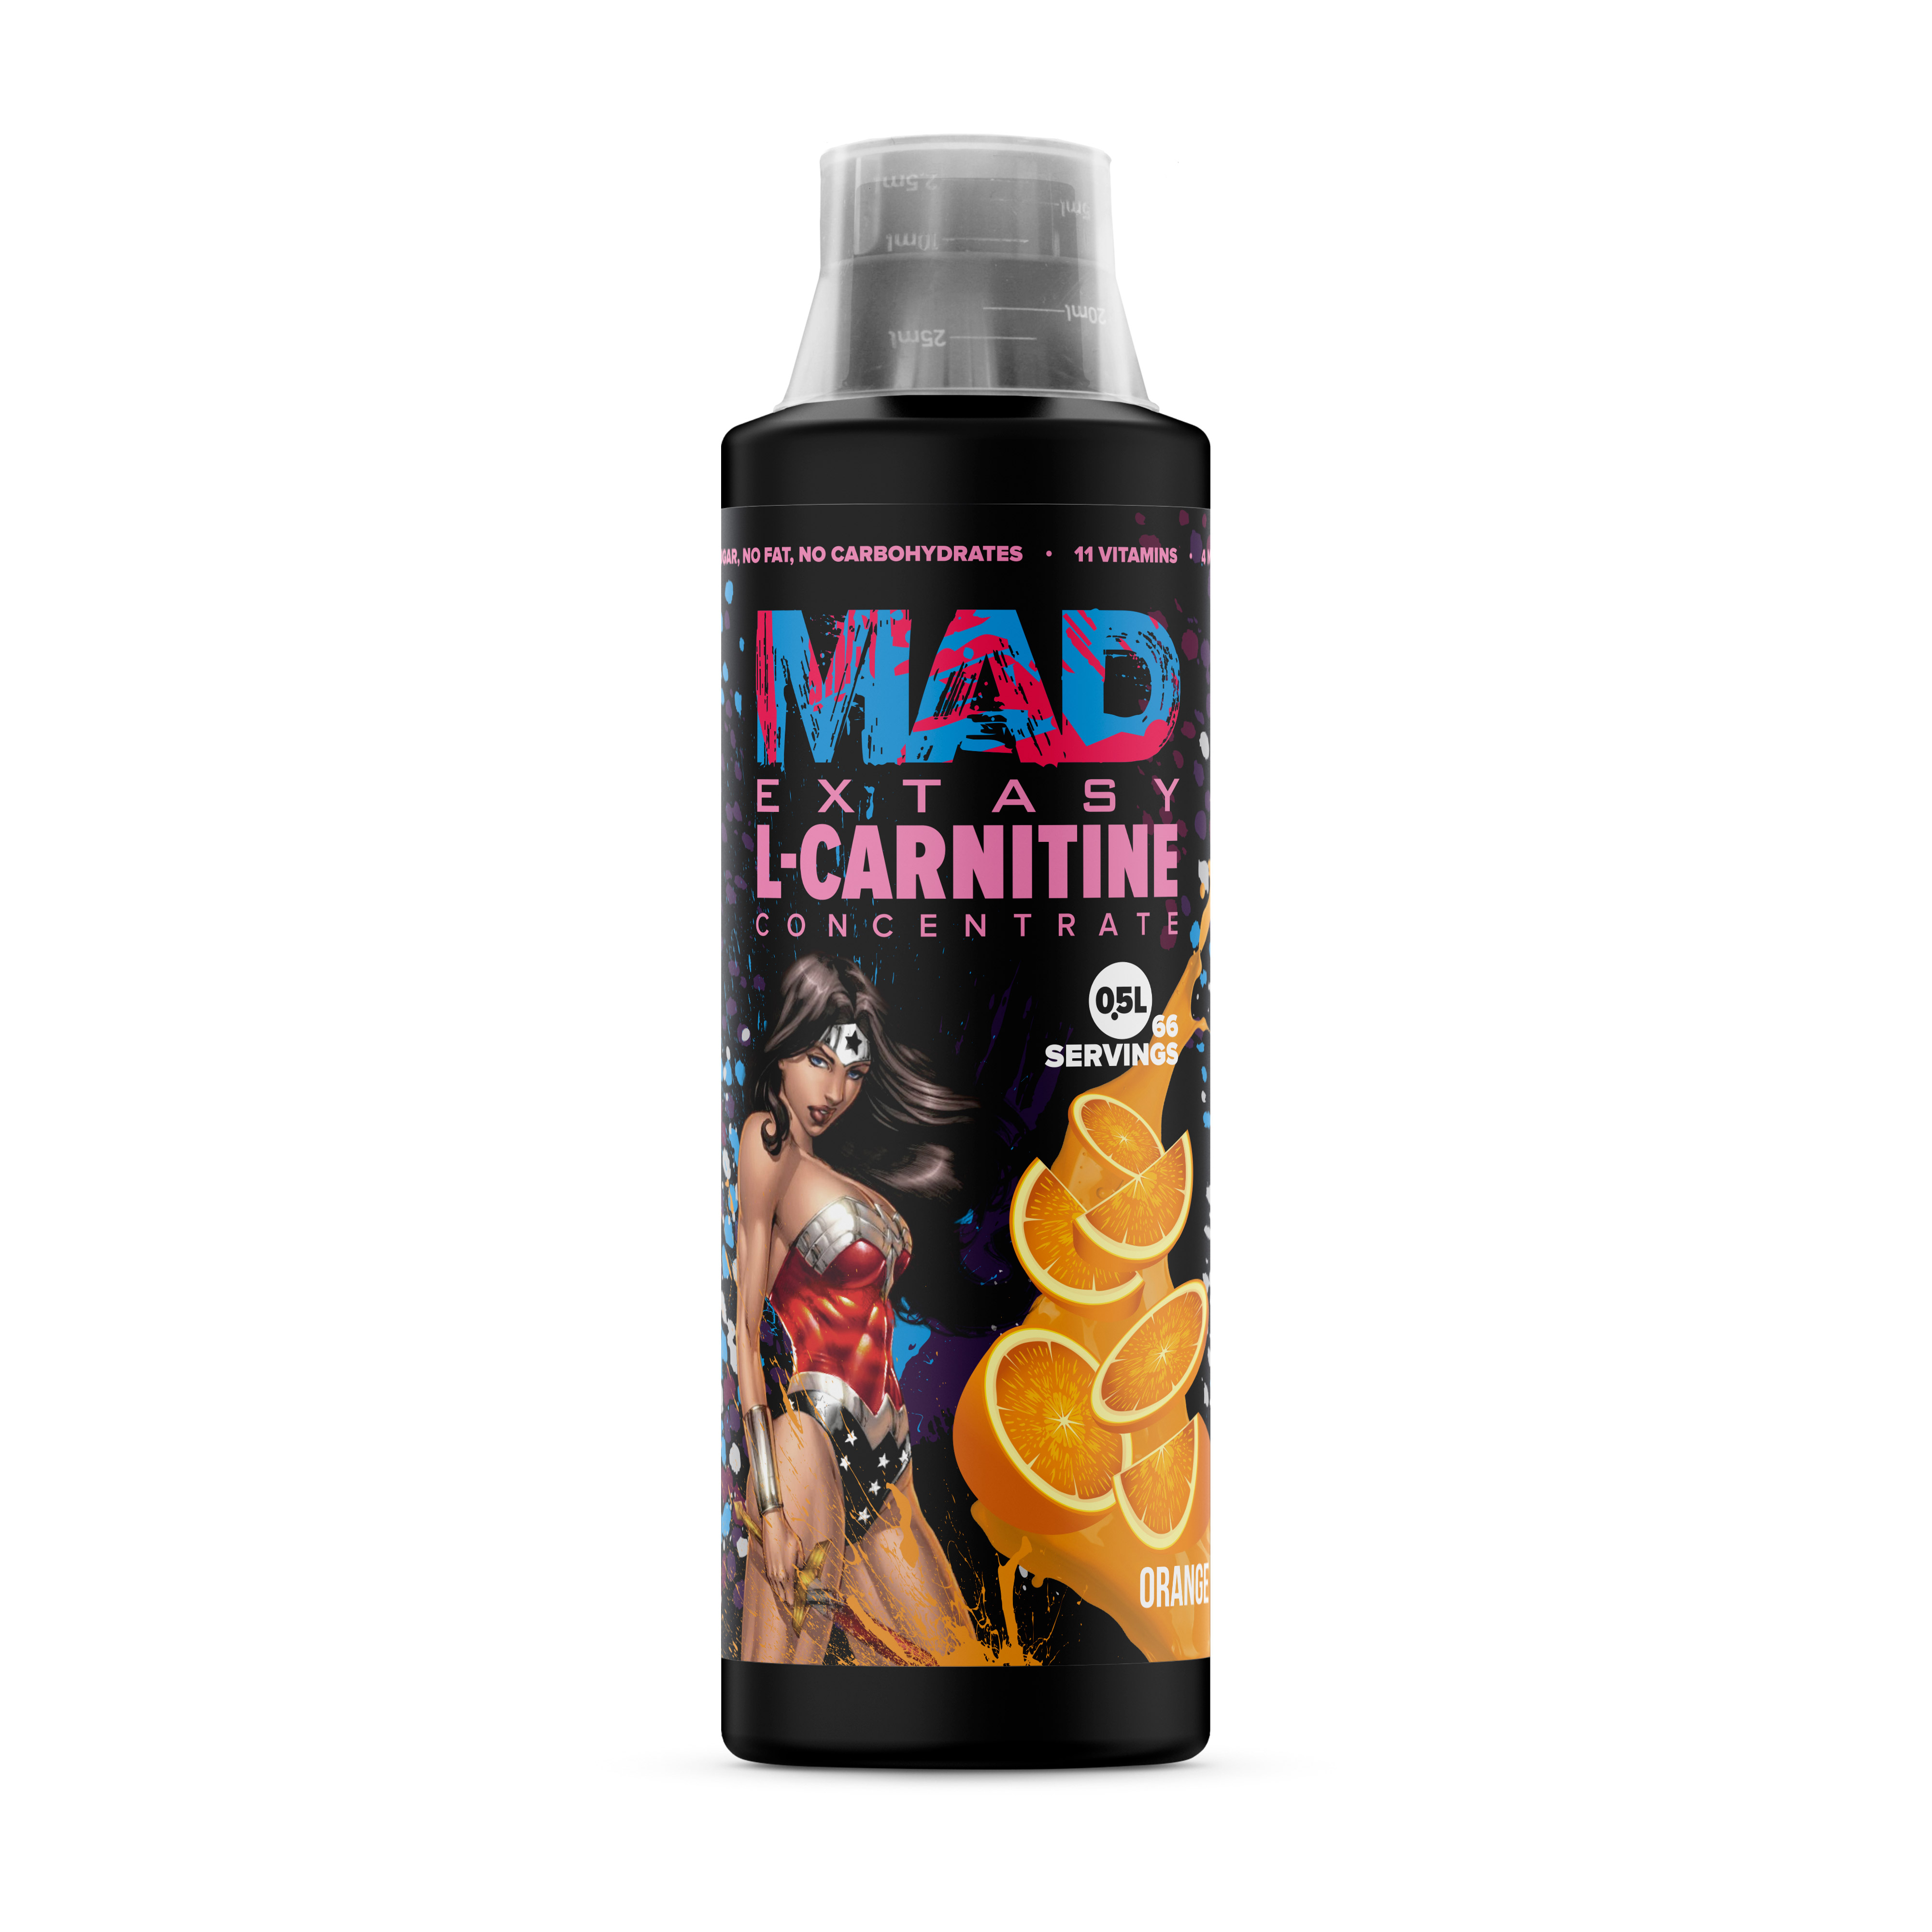 MAD EXTASY L-CARNITINE concentrate